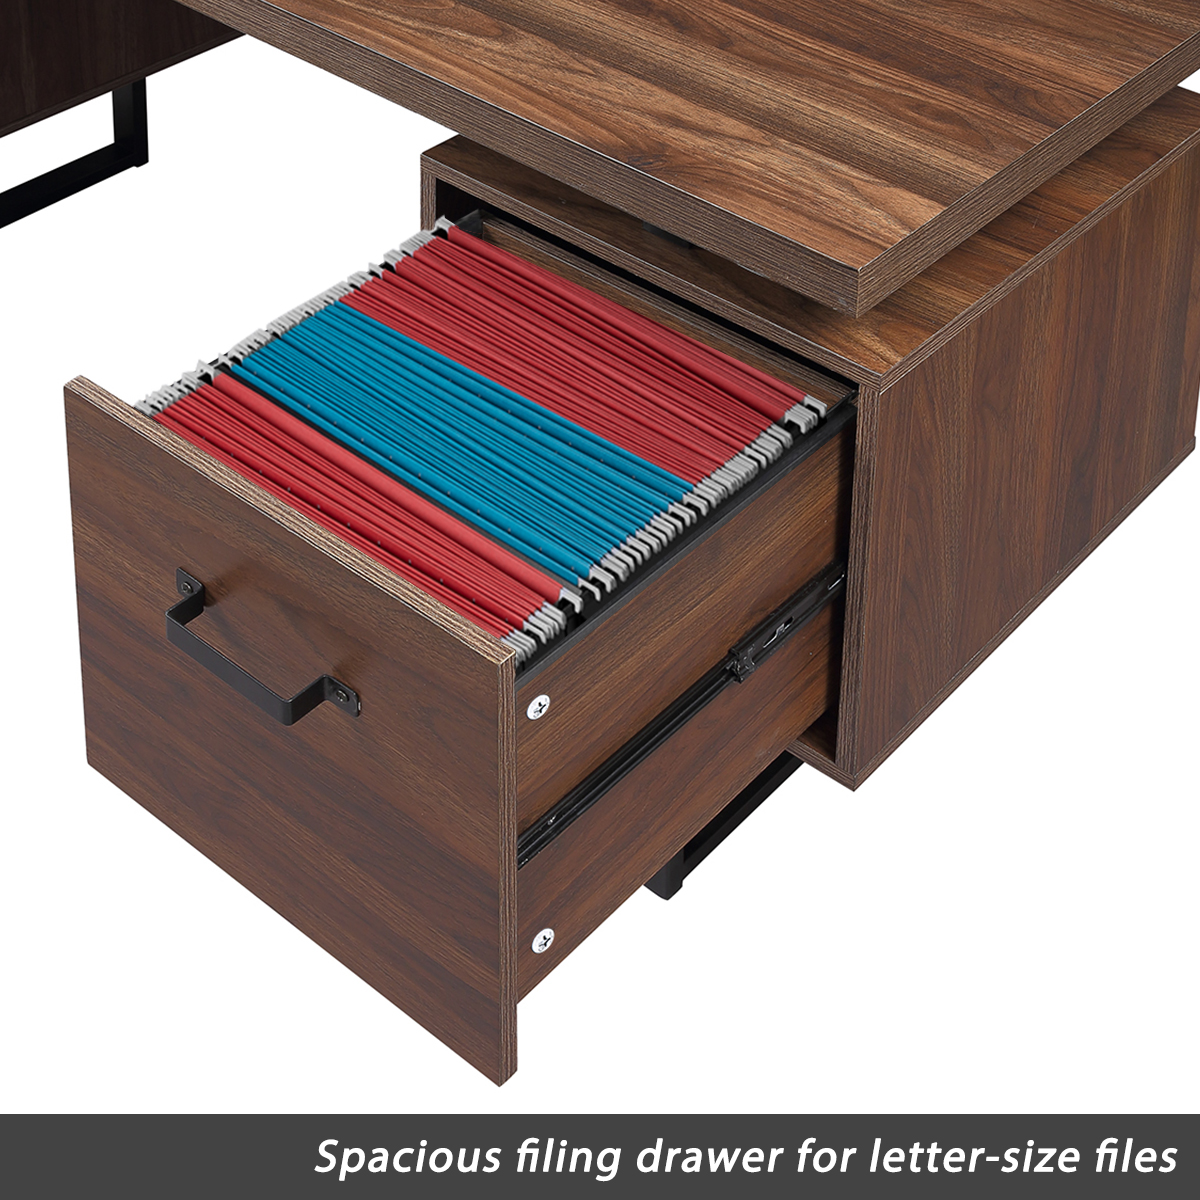 59" Writing Study Table With Drawers - WF193467DAA